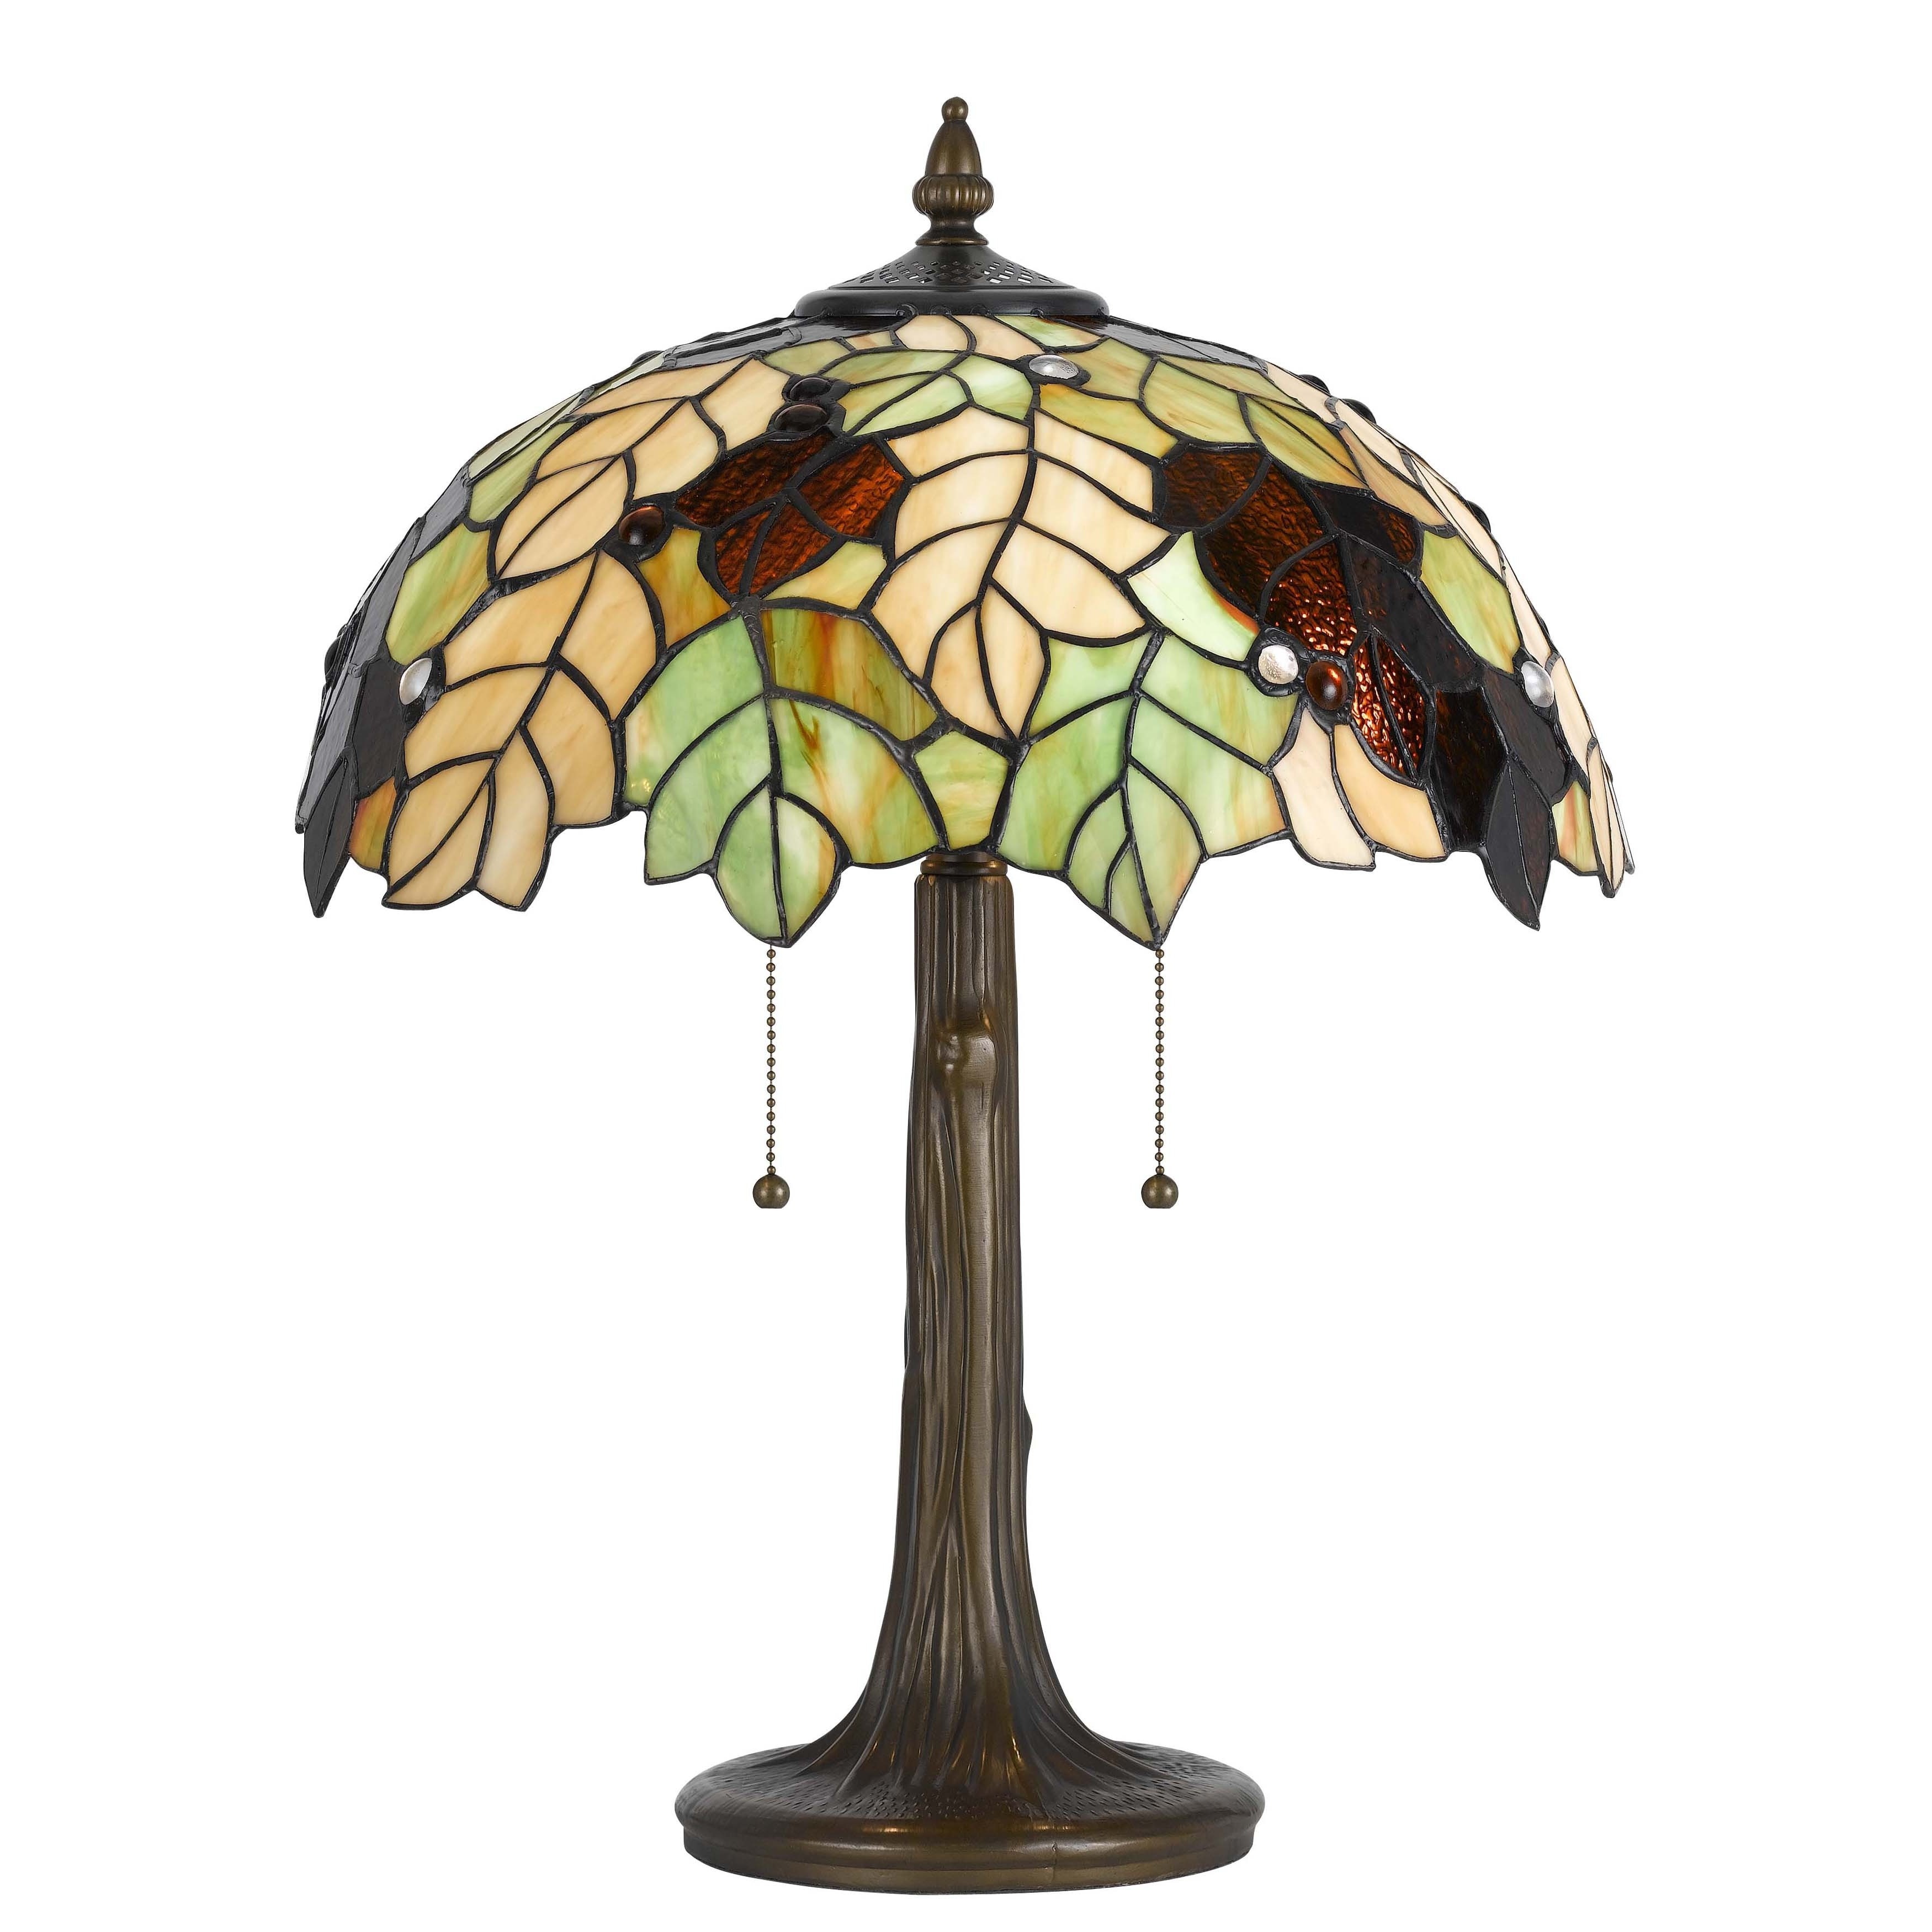 Cal Lighting Tiffany Table Lamp (Glass/ metalFixture finish Antique BrassOn/off switchNumber of lights Two (2)Requires Two (2) 60 watt CFL fluorescent or regular bulbs (not included)Dimensions 23 inches high x 13 inches wide Shade dimension 8 inches 